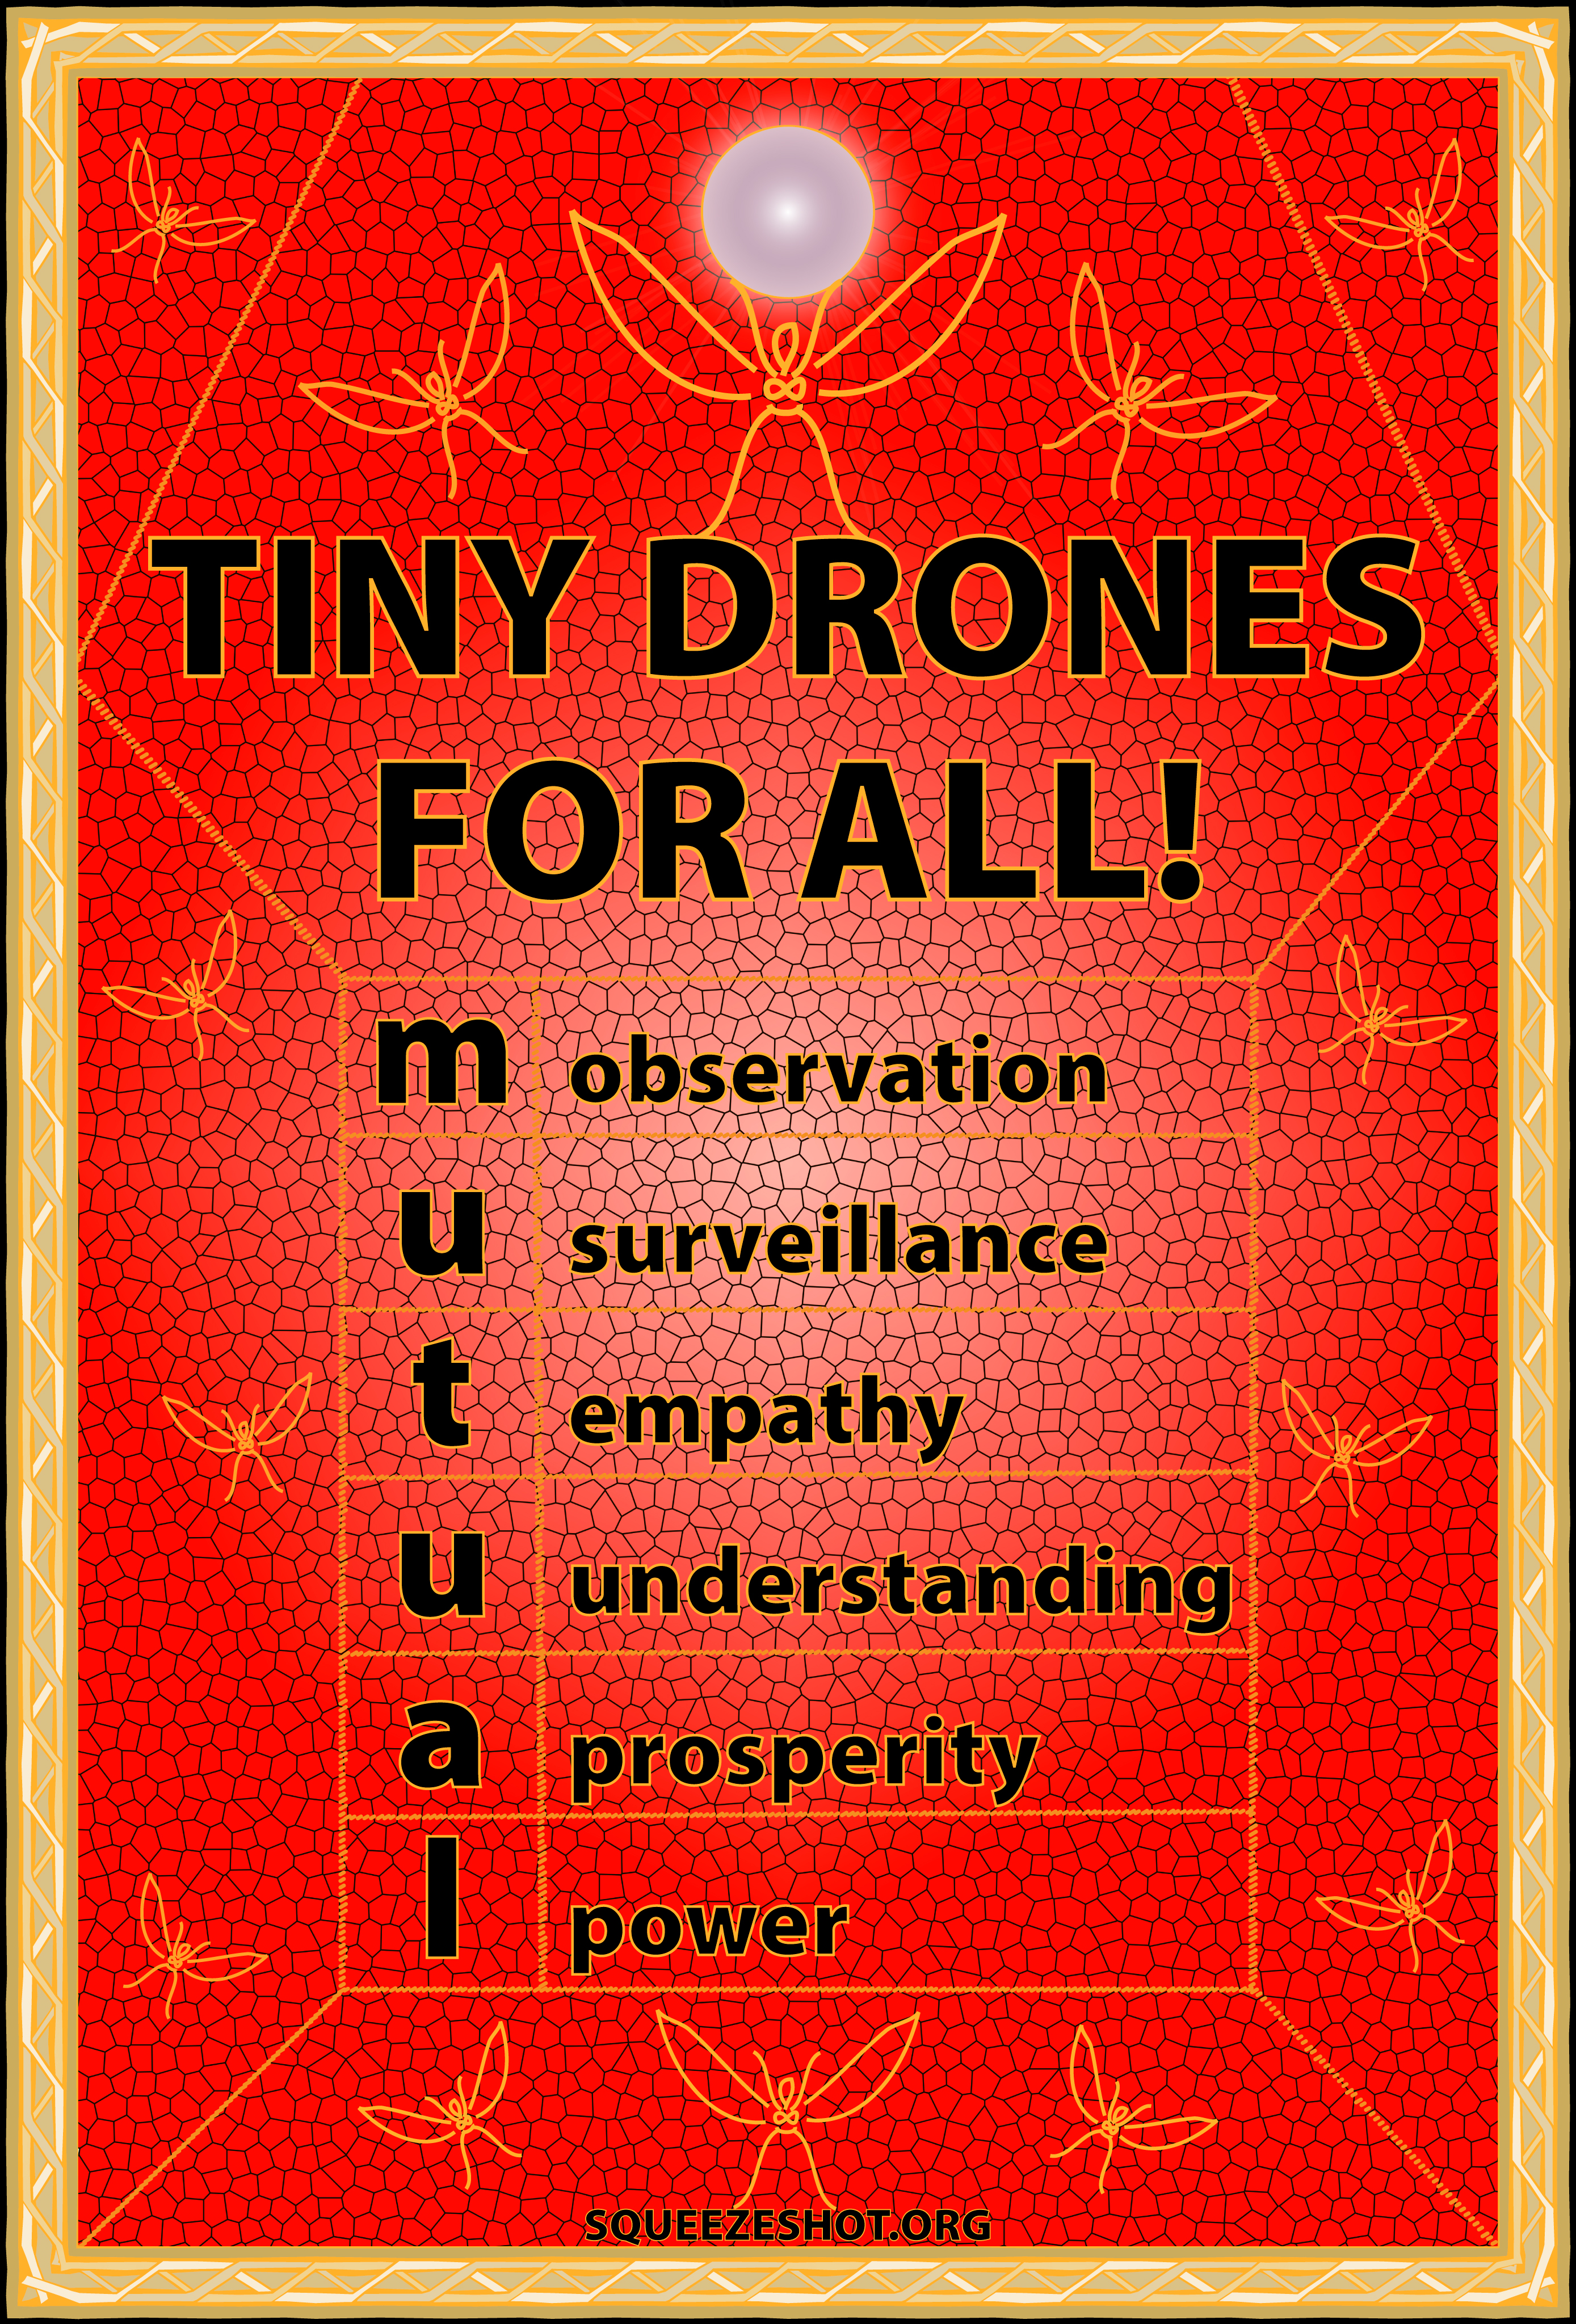 Tiny drones for all!